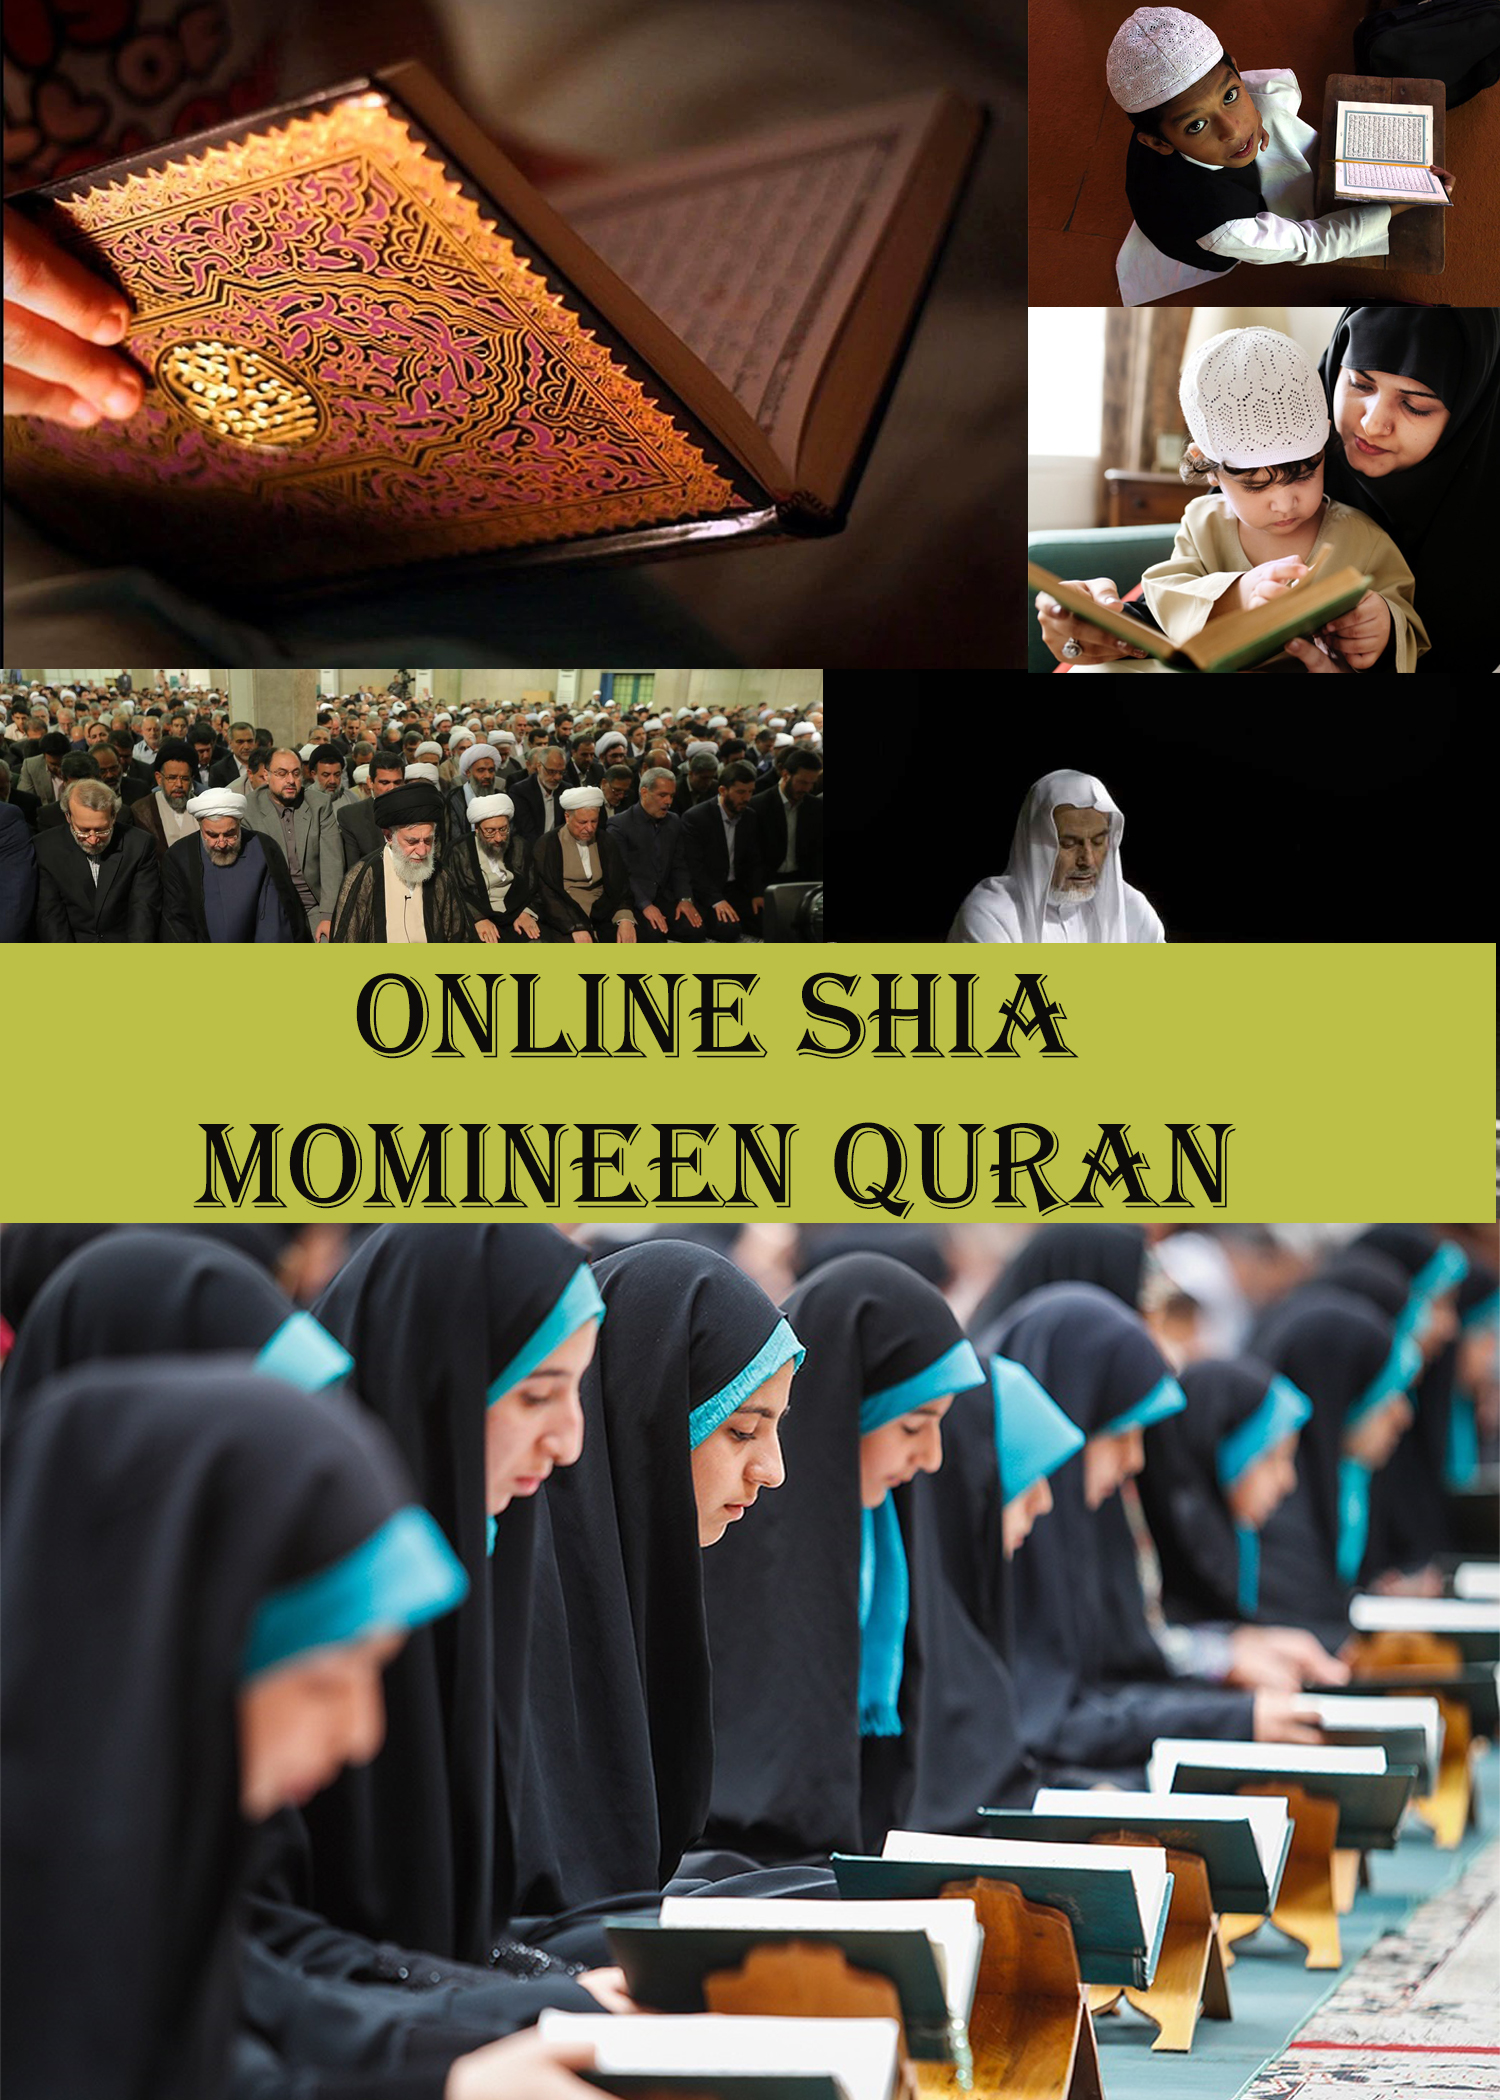 Online Quran classes taught by Shia Muslims are available here. With the use of a computer and an online connection, you can take a variety of courses